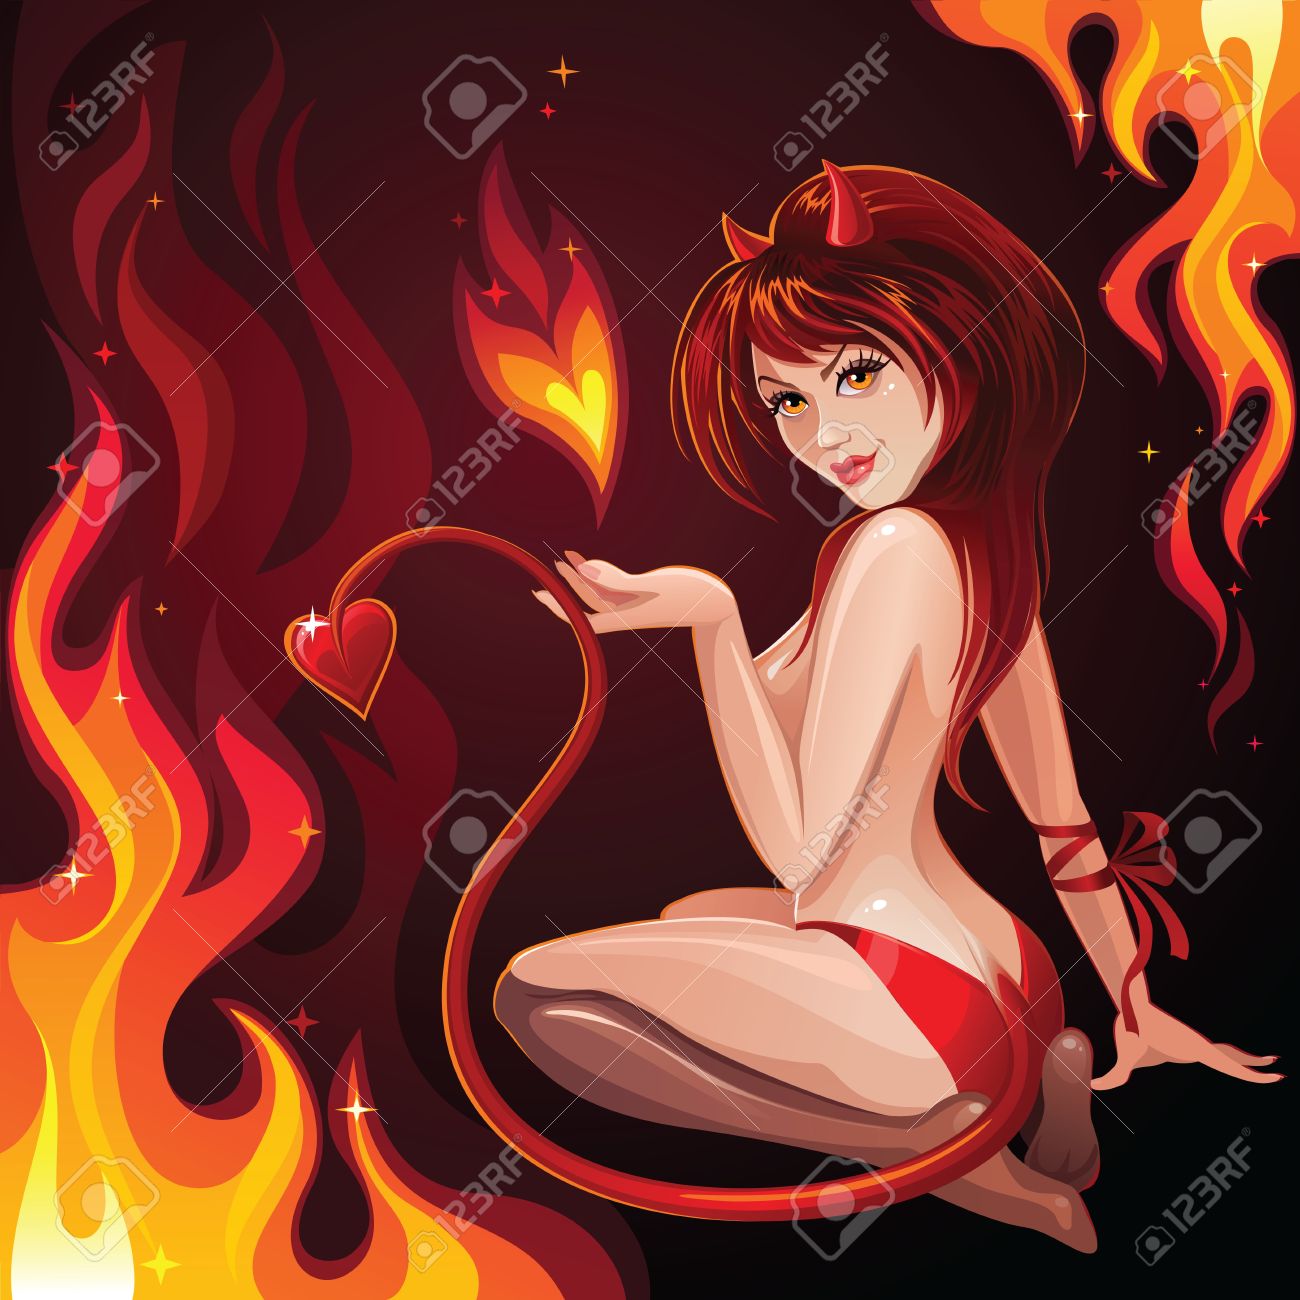 sexy hot pictures burning